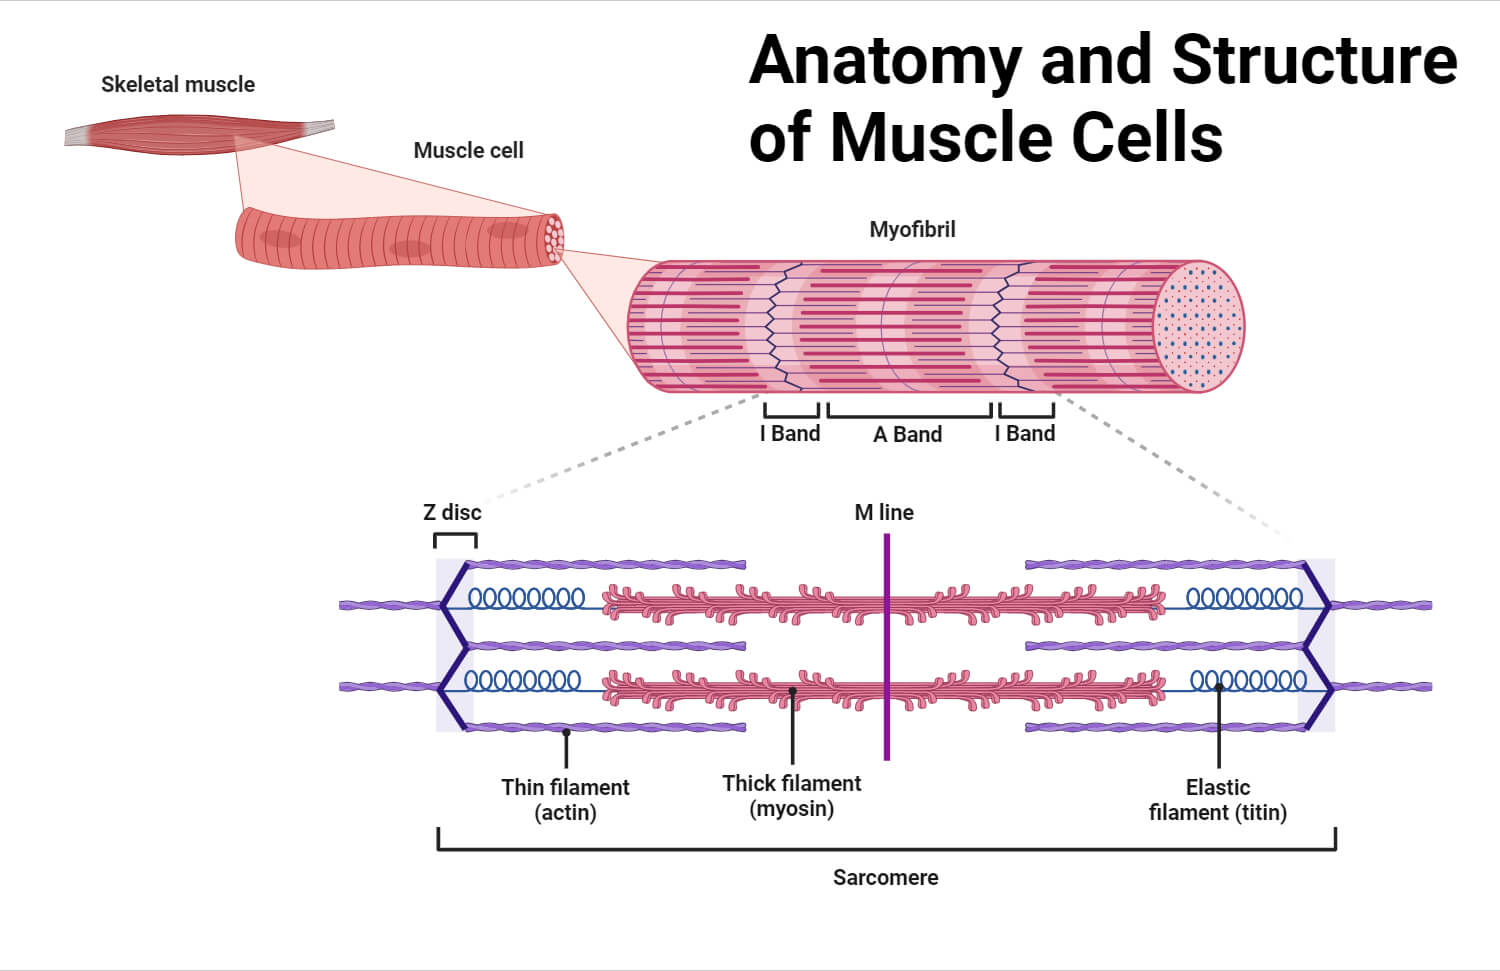 Anatomy and Structure of Muscle Cells